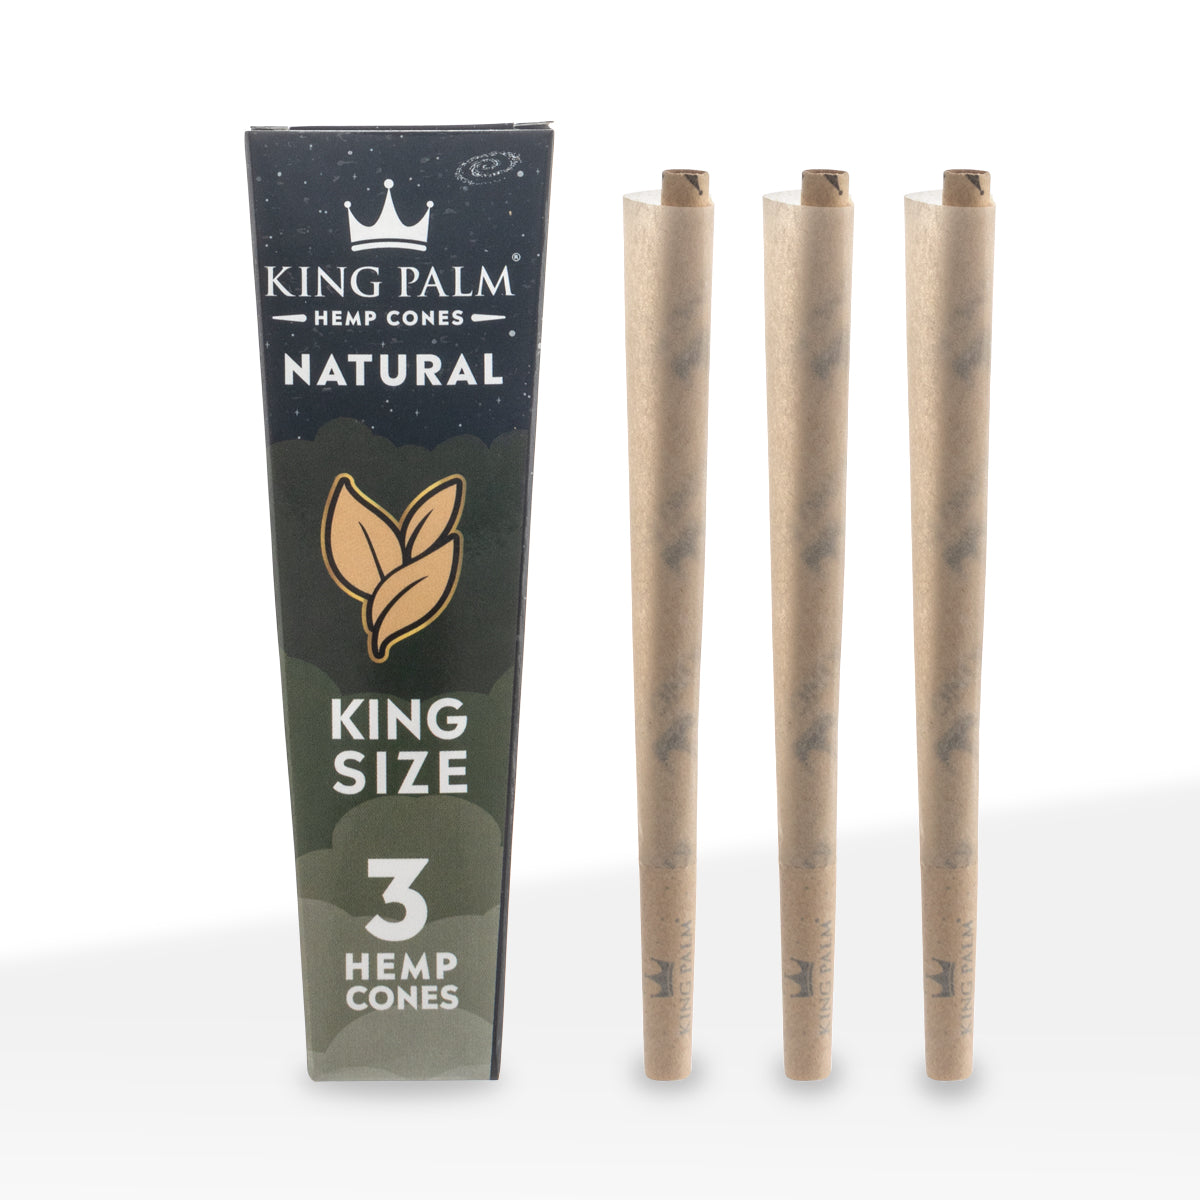 King Palm™ | Hemp Cones King Size | 3 Pack - 30 Count - Various Flavors  Biohazard Inc   